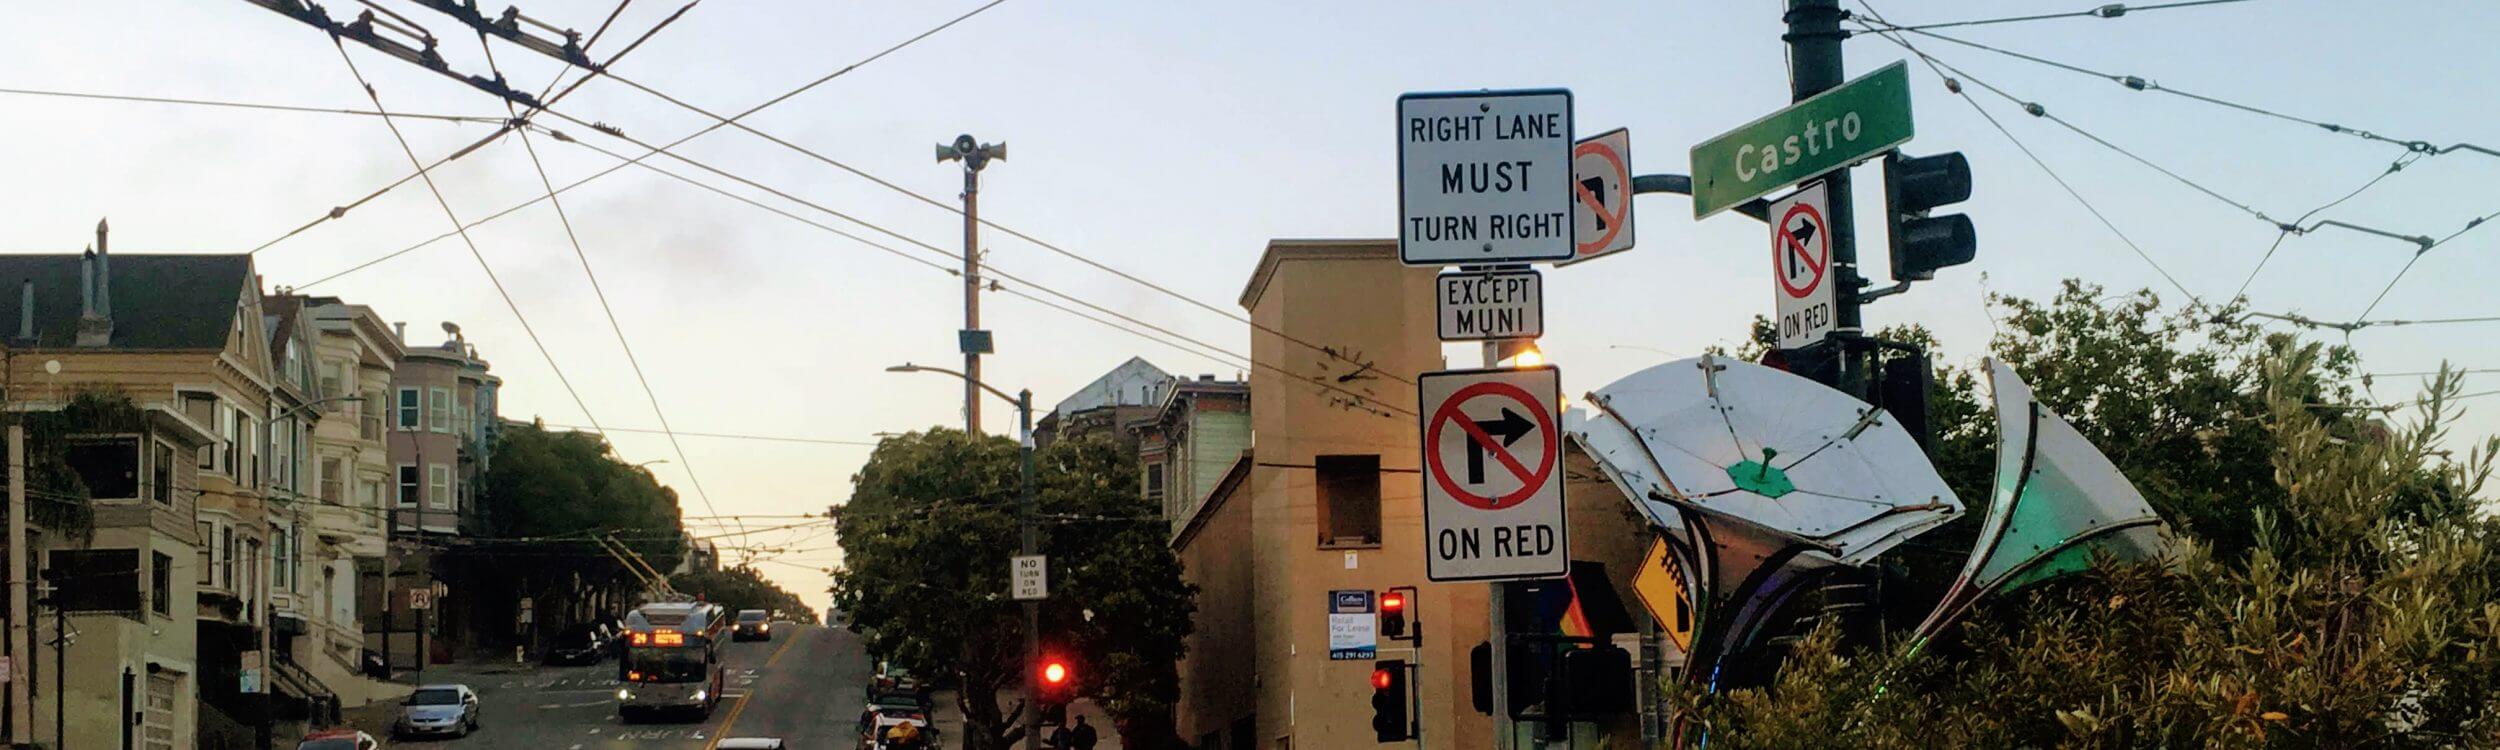 Let’s greenlight a no-turn-on-red policy in San Francisco